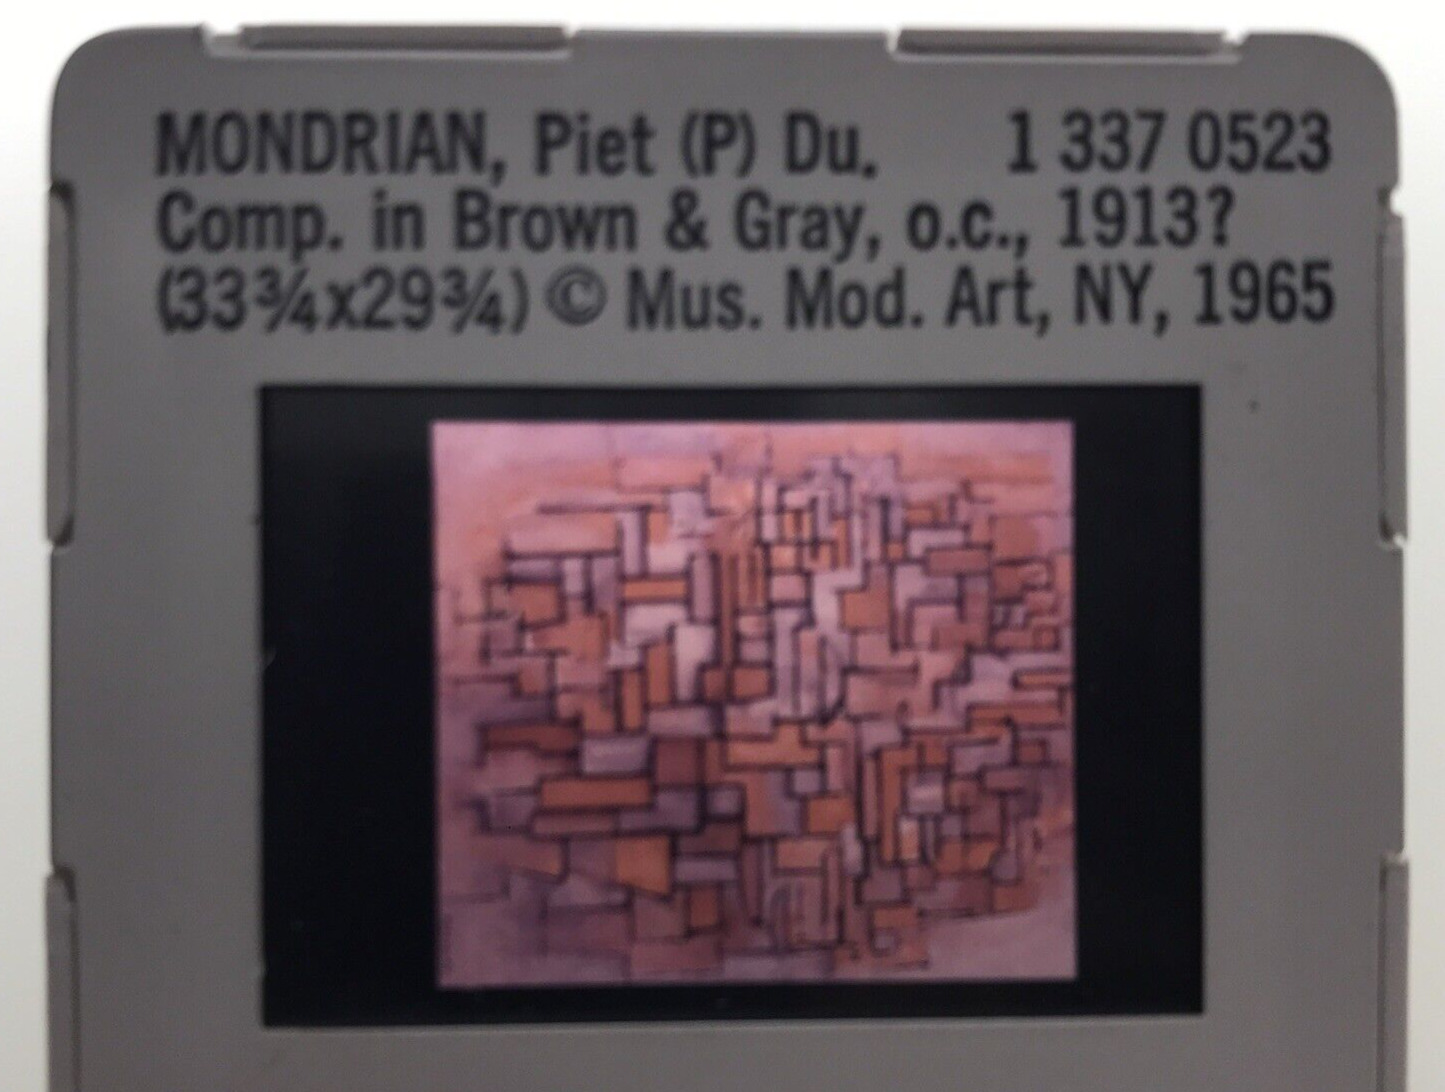 1913 Composition in Brown & Gray by Piet Mondrian Oil Canvas 35mm Art Slide